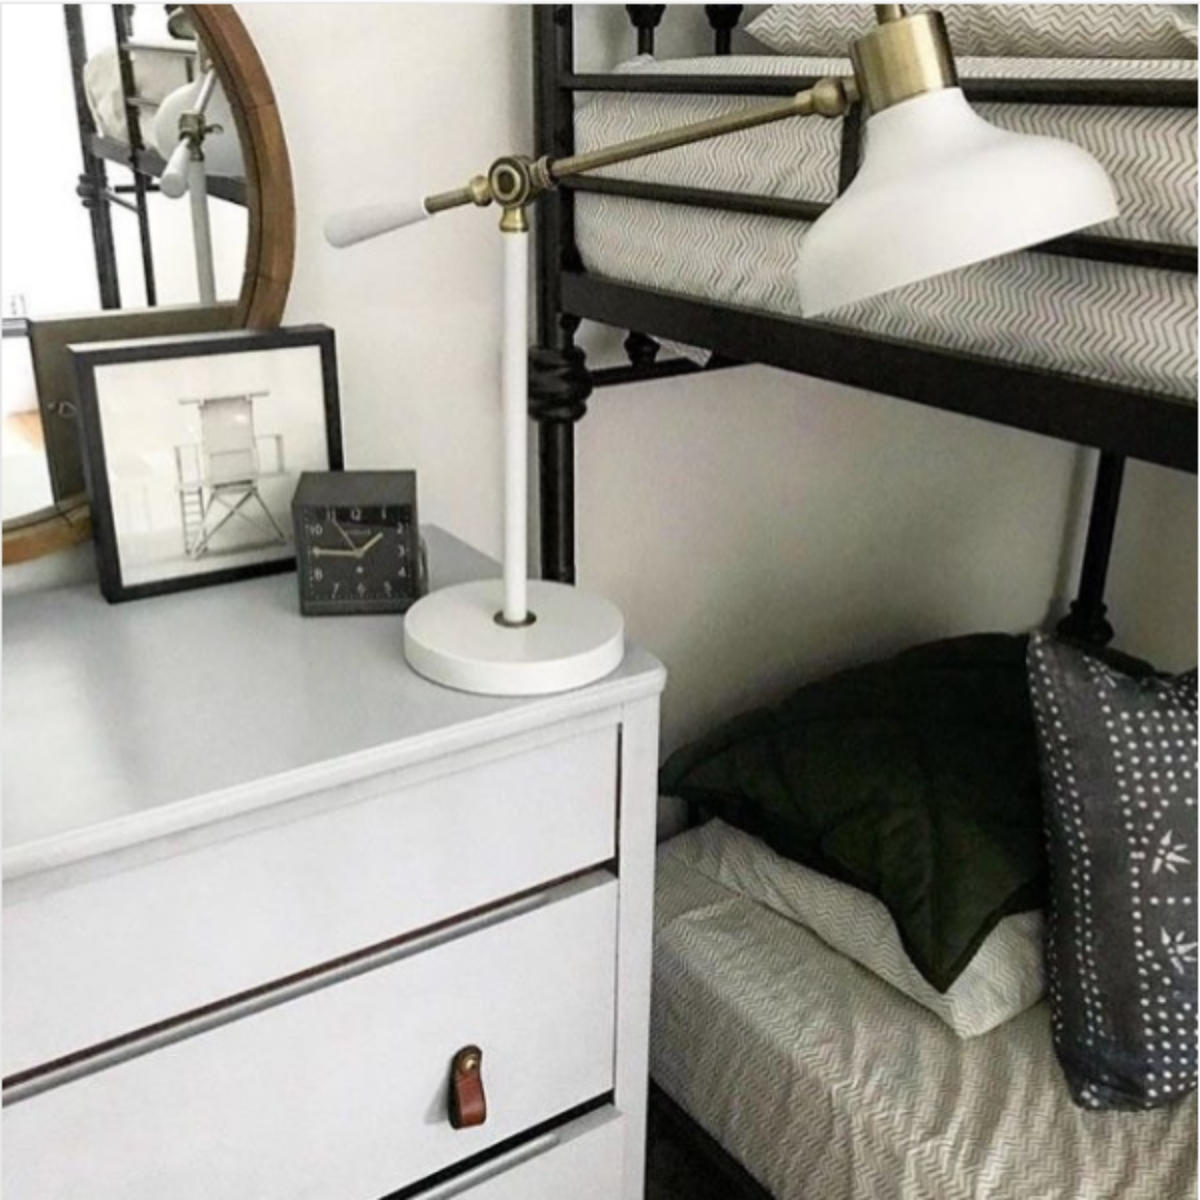 Customer photo of a honey colored Hawthorne small leather pull on a chest of drawers next to a bunk bed. The chest and decor is white and black.